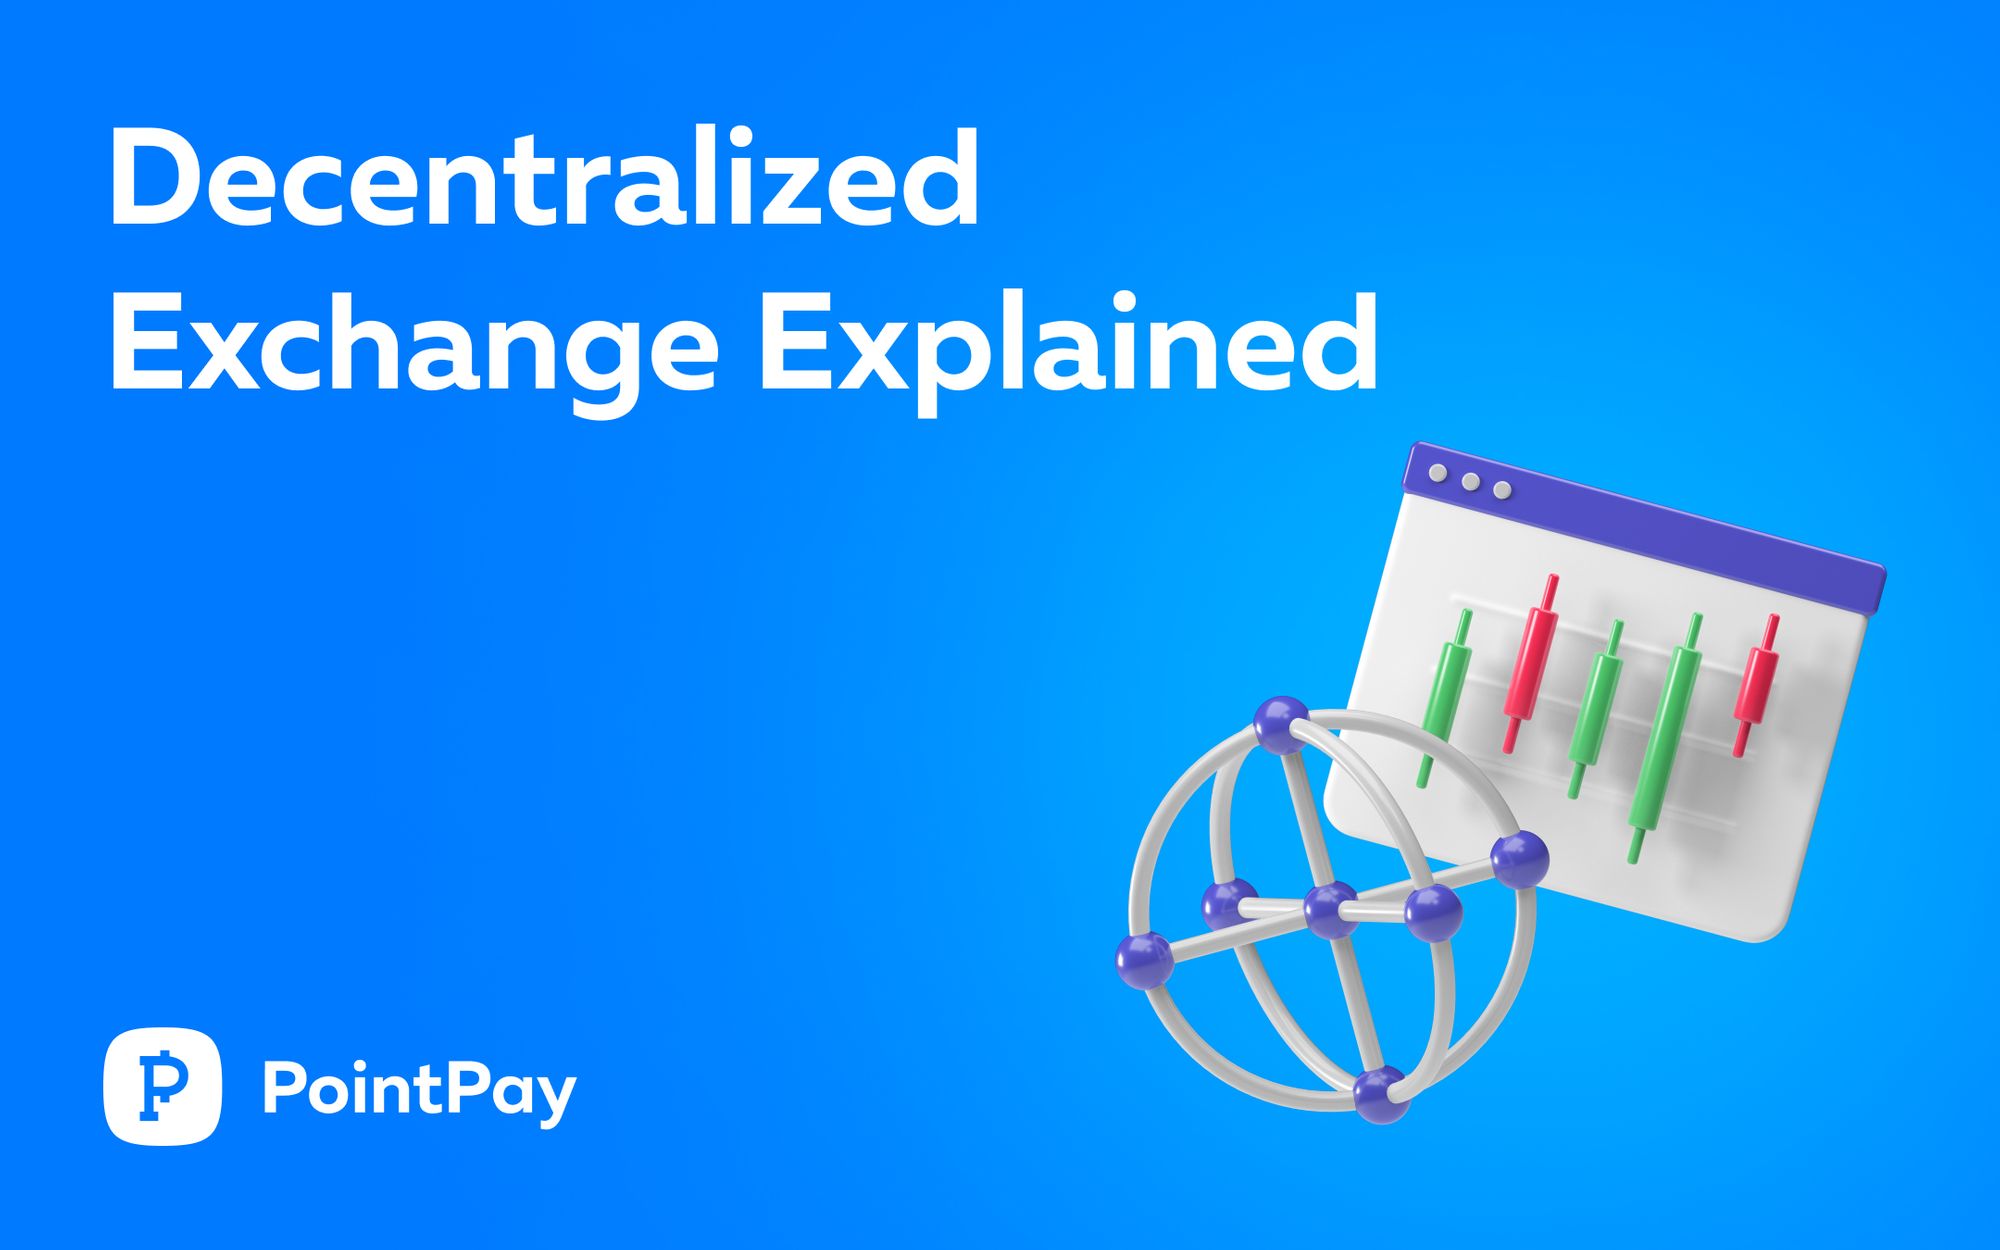 What Is a Decentralized Exchange (DEX)?